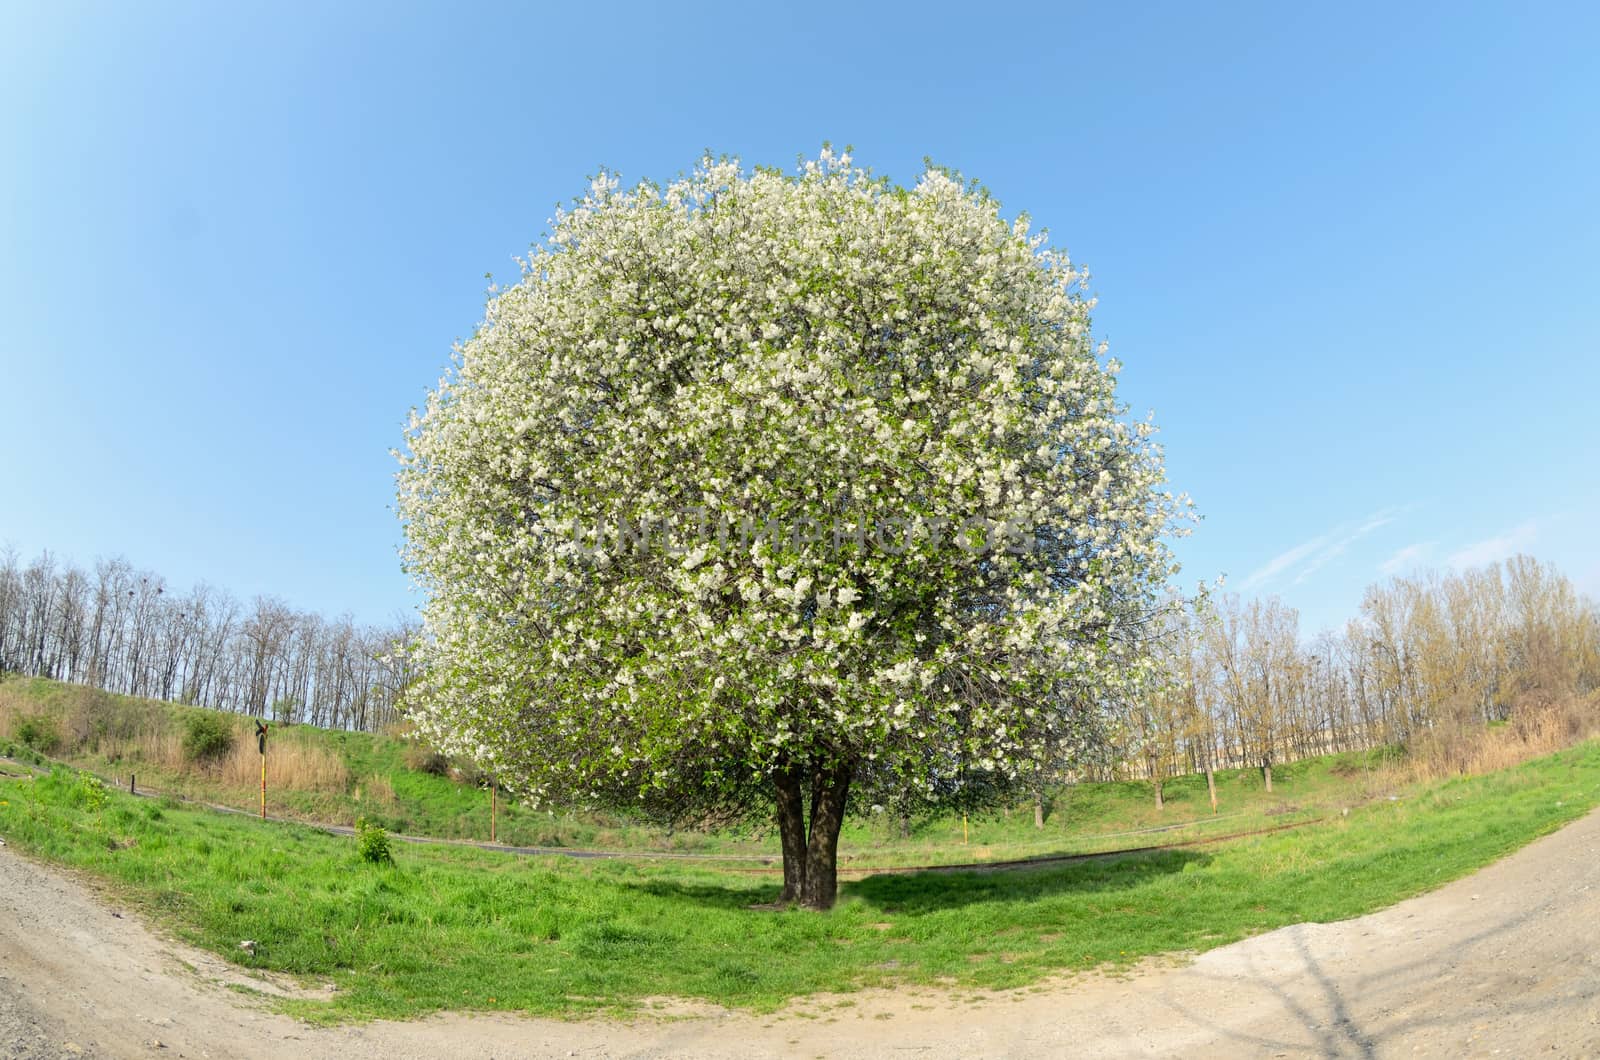 Blossoming Cherry Tree in Spring